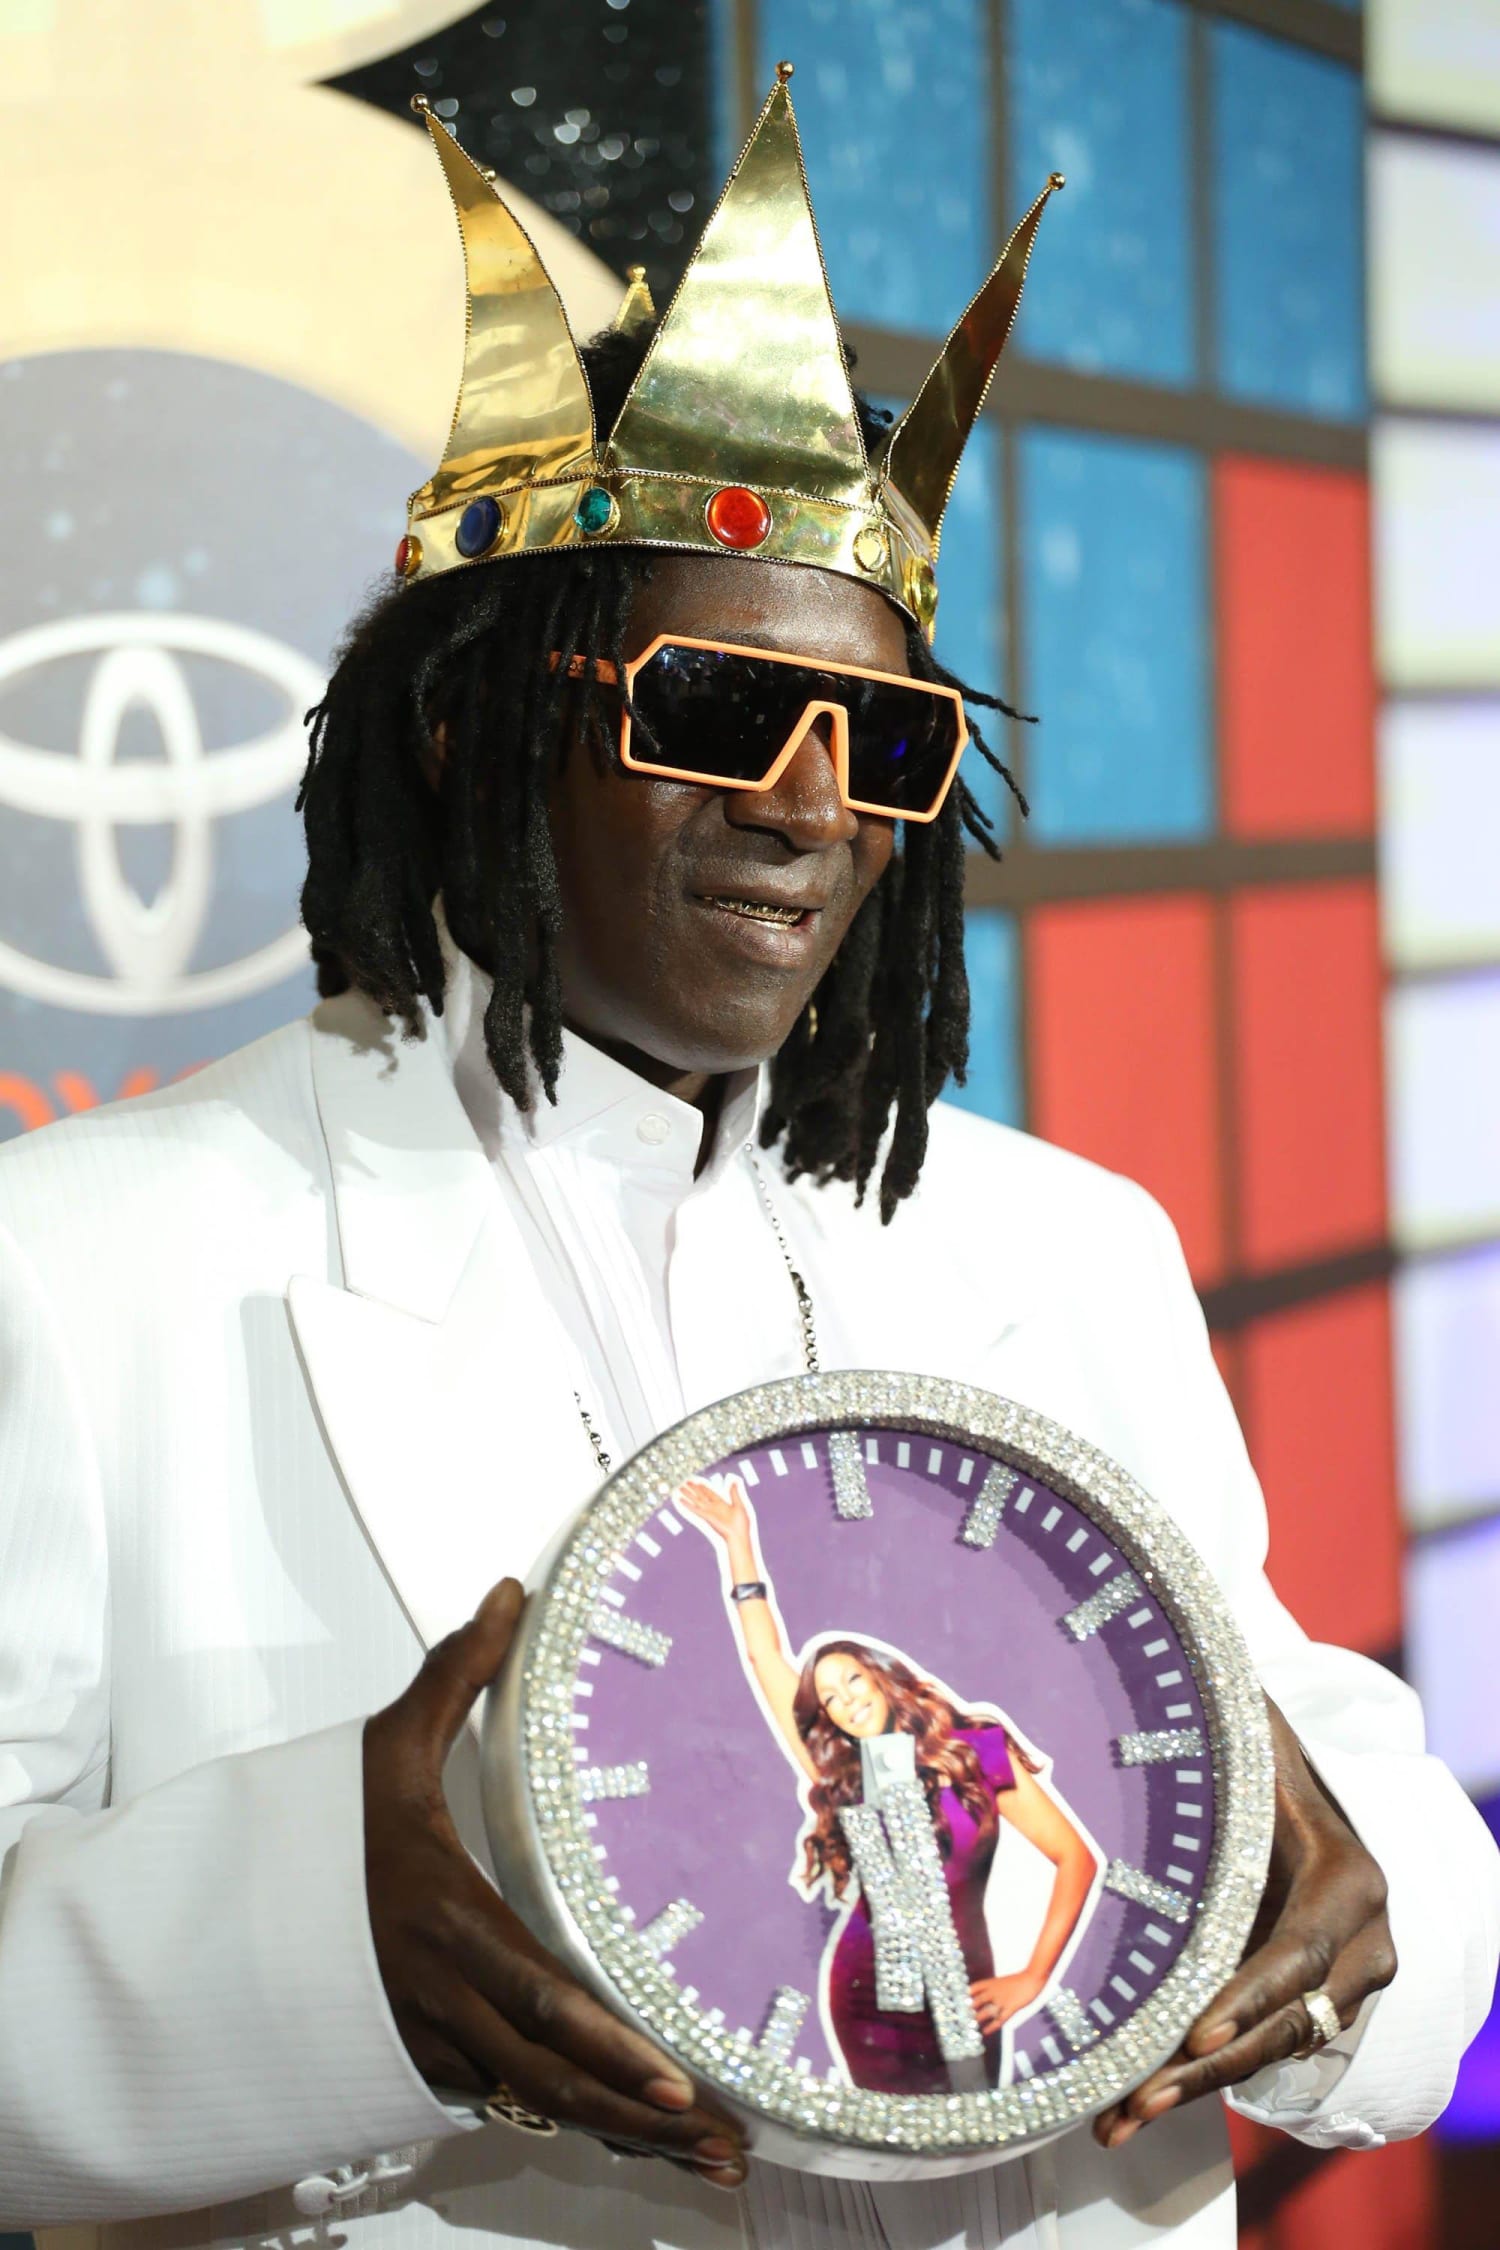 Rapper Flavor Flav is due in court this month after being indicted on charg...